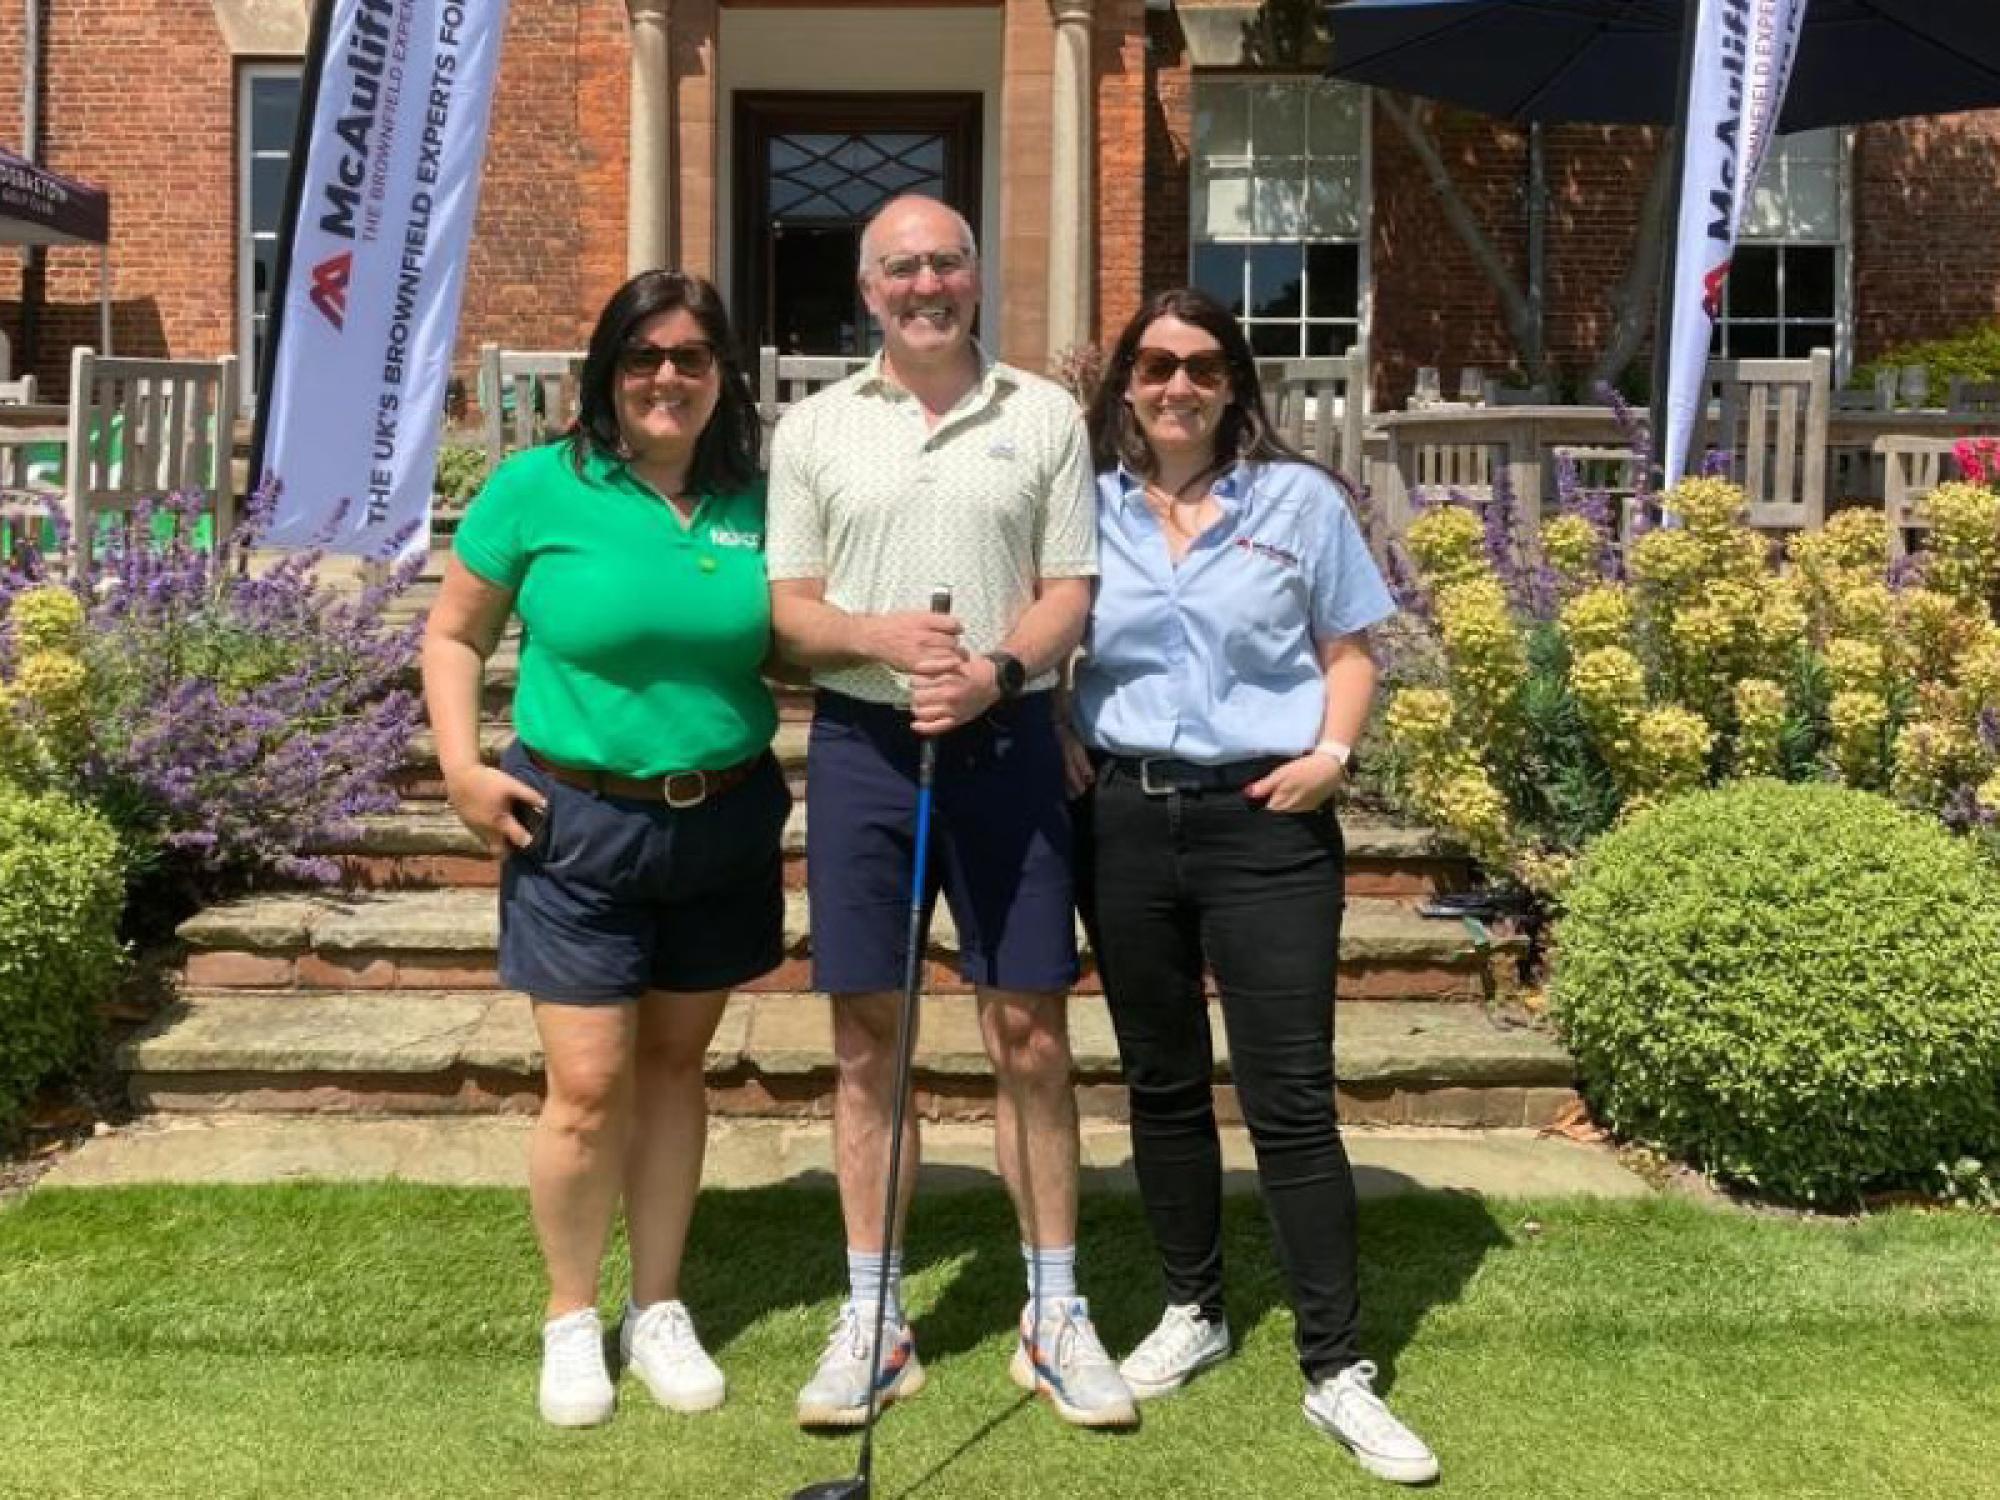 Midlands business leaders swung into action to raise a record £17,266 for the NSPCC at McAuliffe’s annual Golf Day in July.